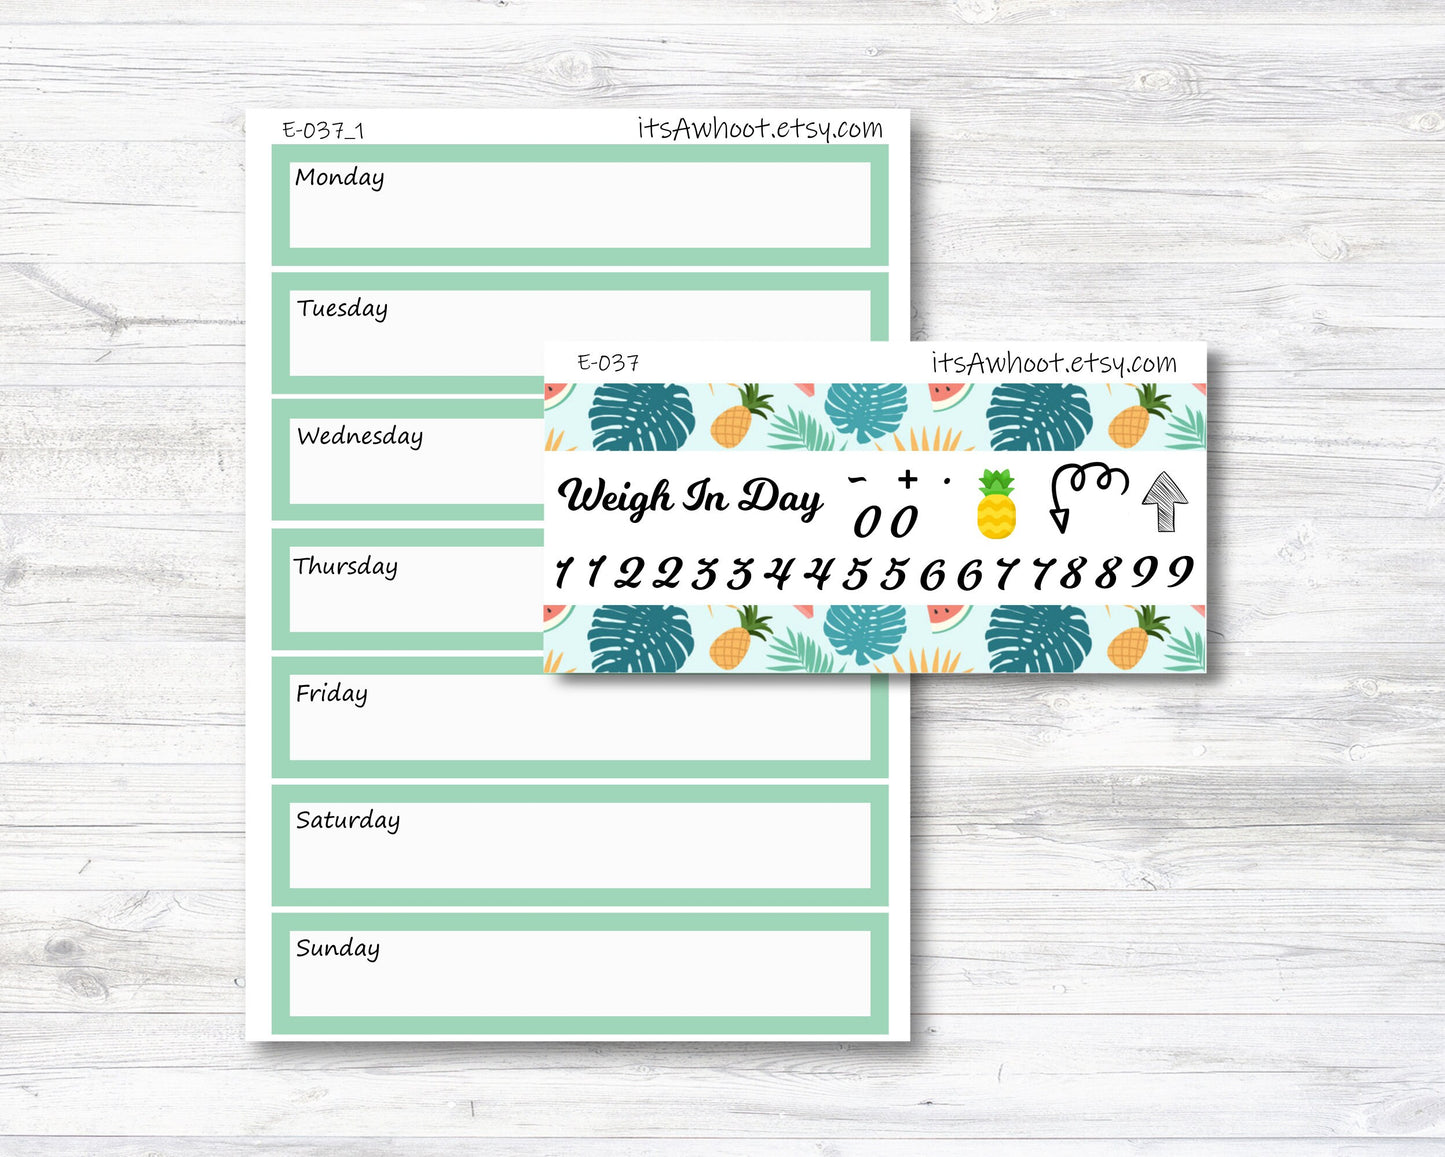 Summer Tropical Kit, Weight Loss Planner Stickers (B076)